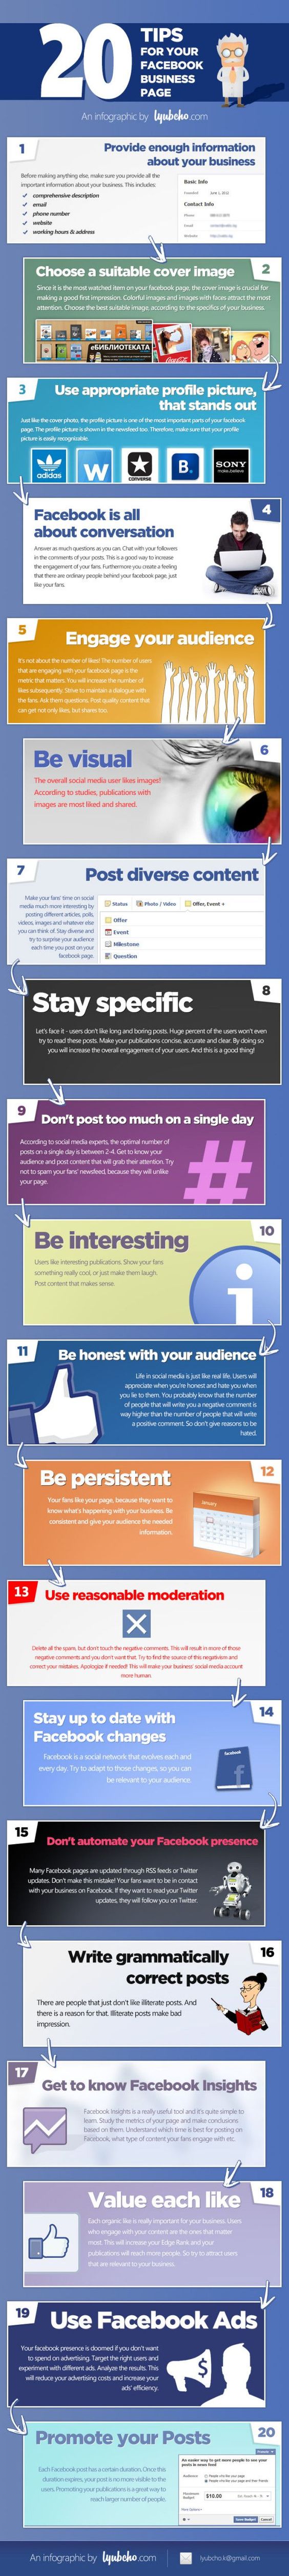 20 tips for your Facebook business page #Infographic